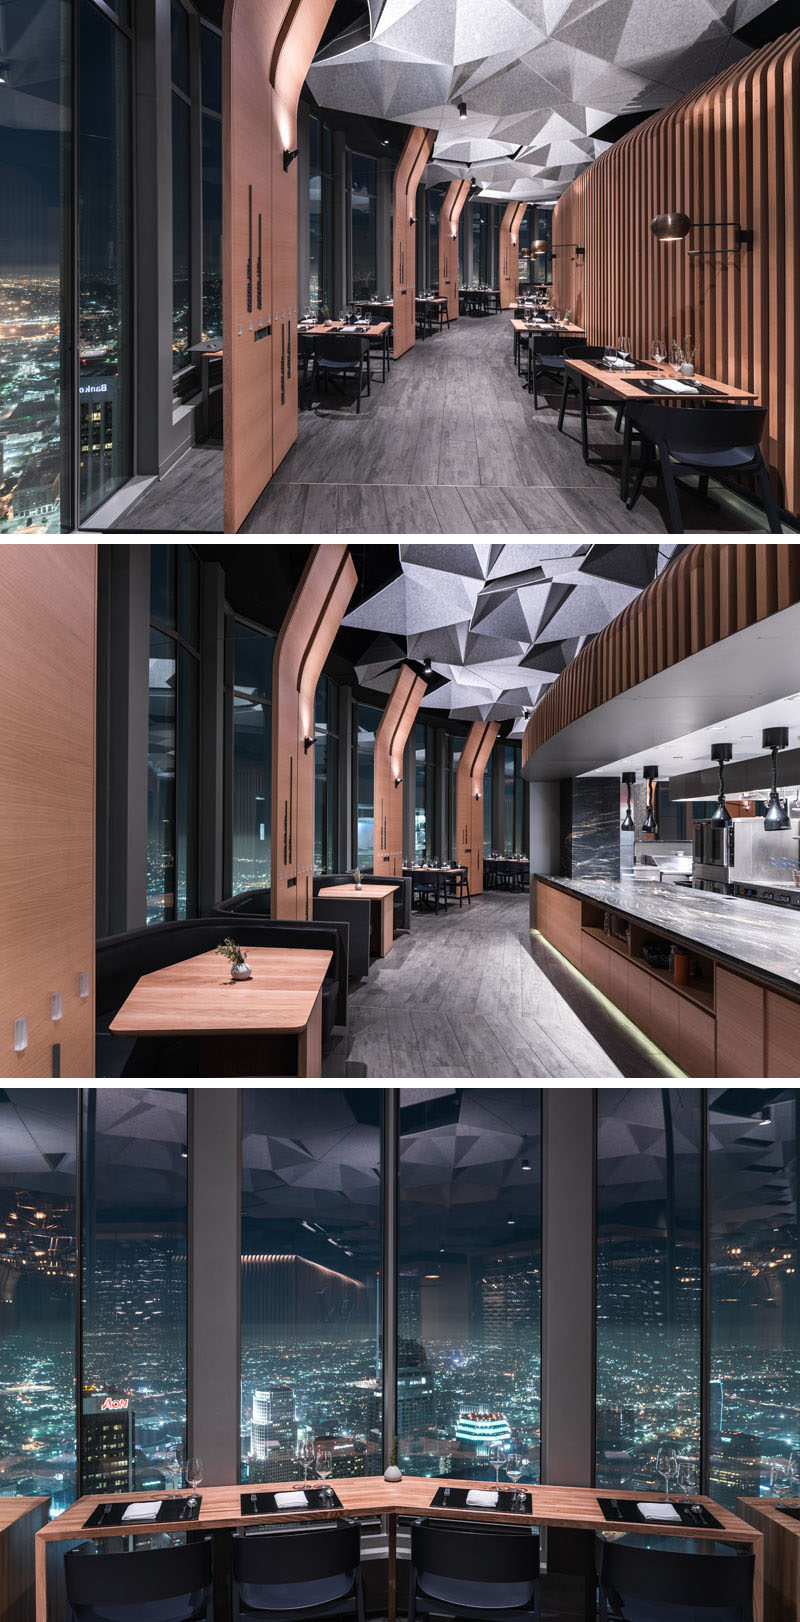 Tag Front Architects have designed 71 Above, a modern restaurant in Los Angeles, California, that wraps around the entire top floor of the US Bank Tower and has 360 degree views. #ModernRestaurant #RestaurantDesign